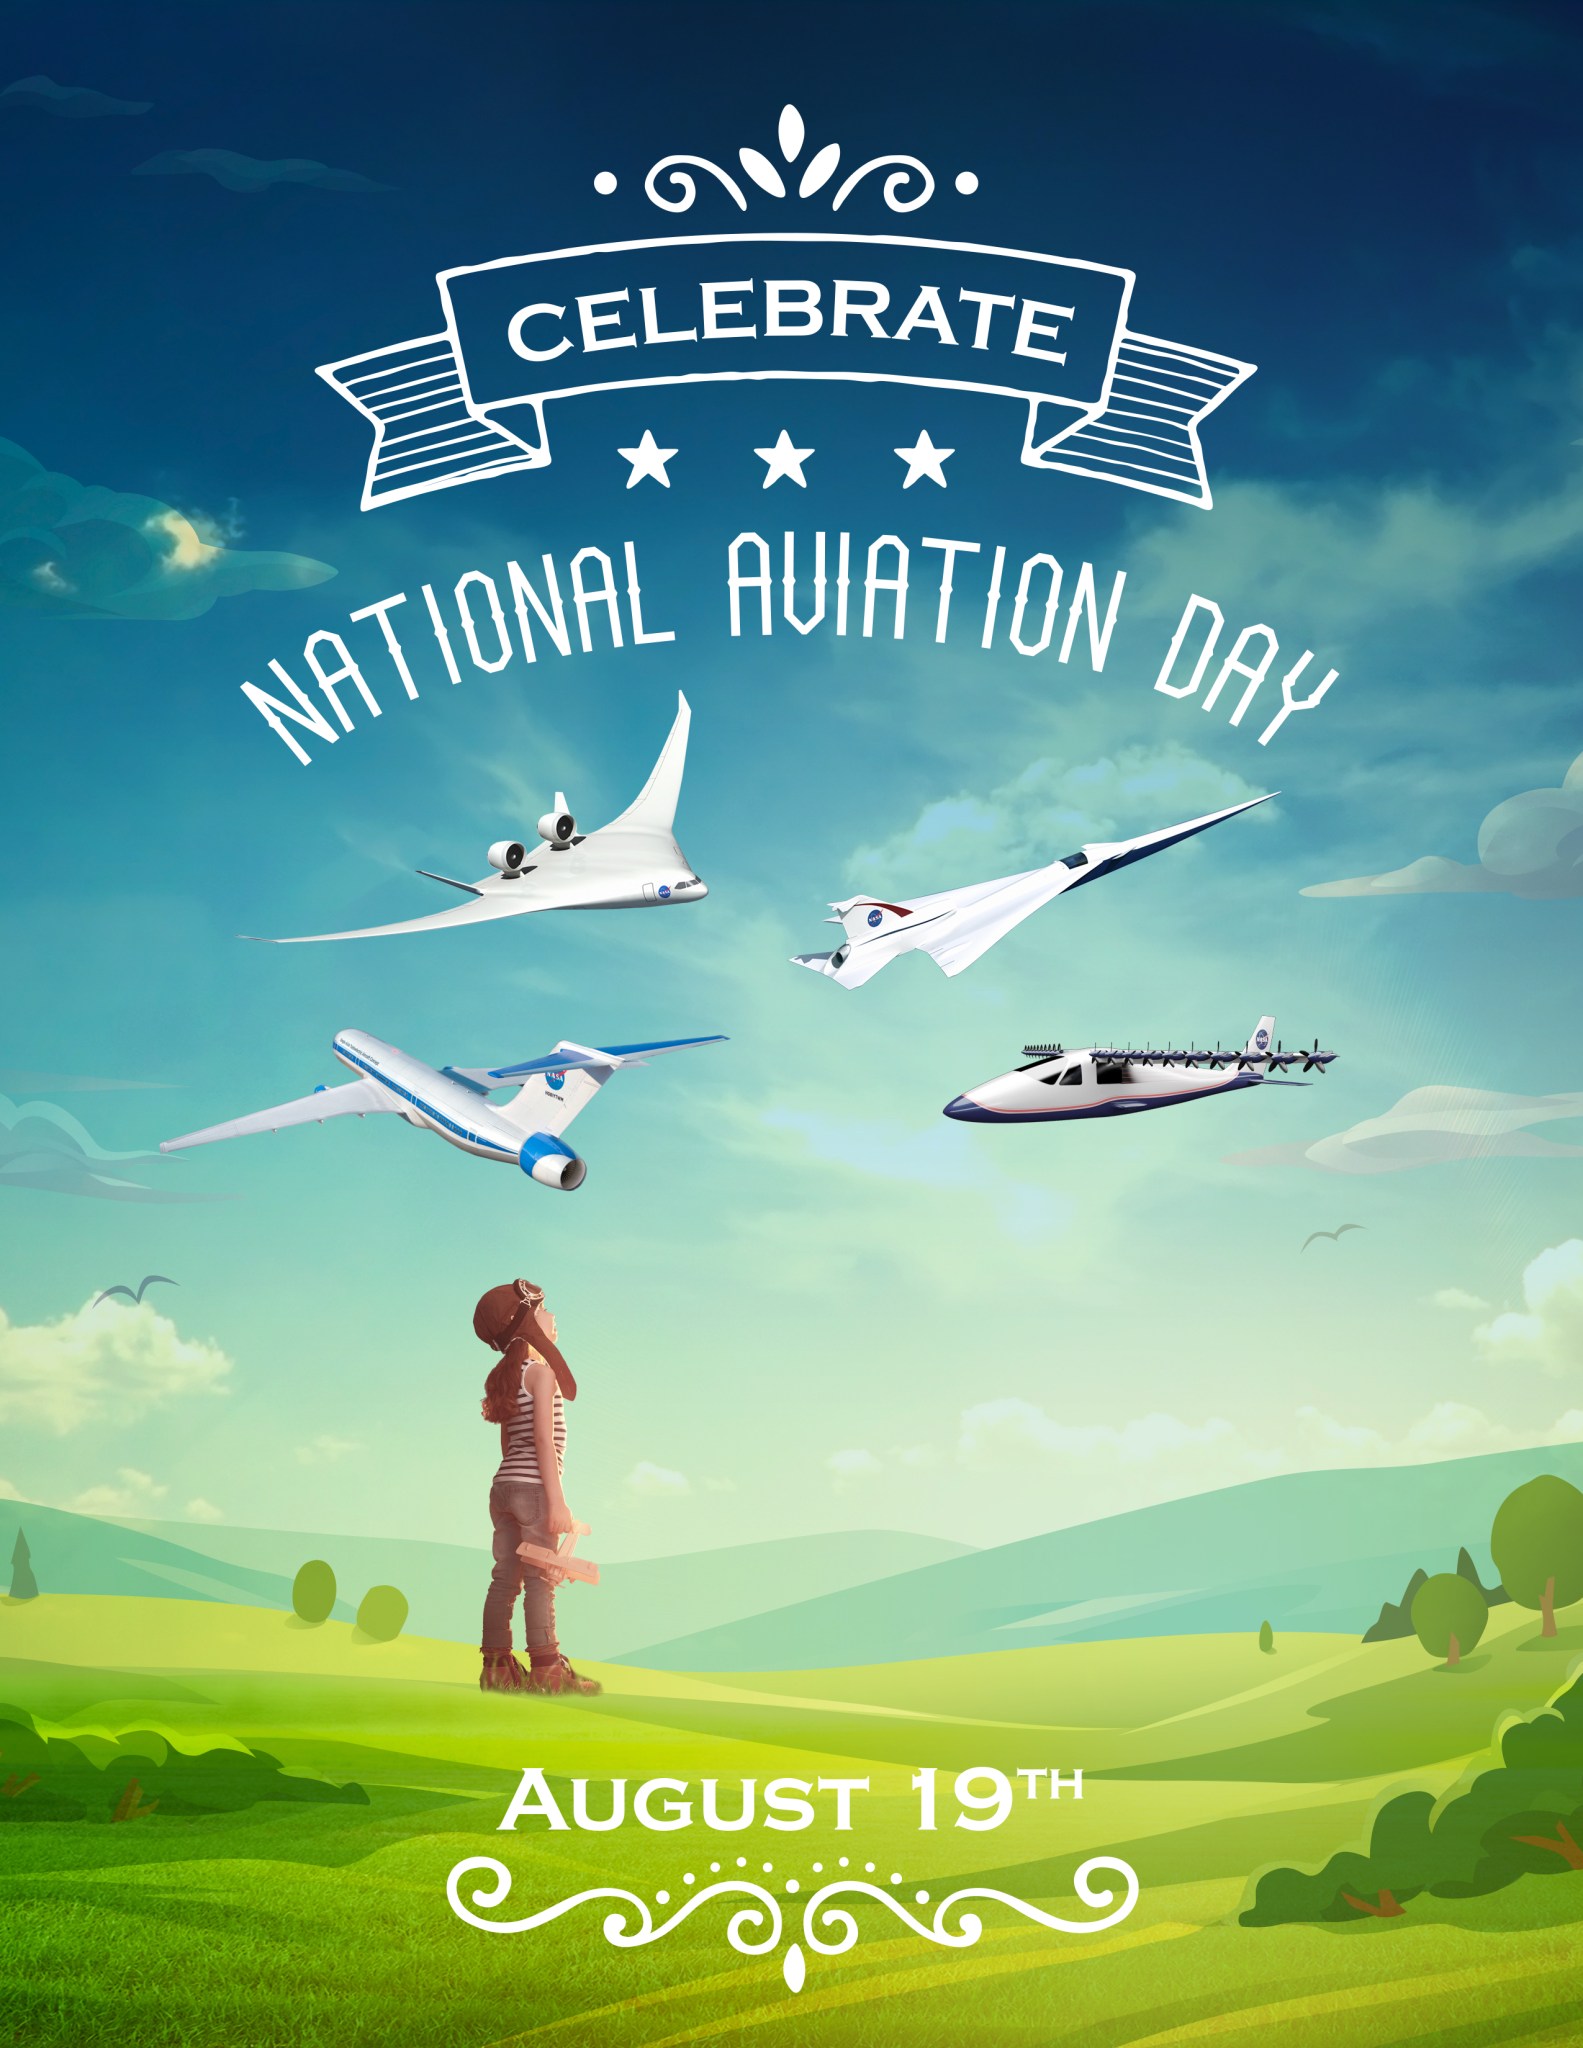 National Aviation Day 2016 illustration, showing a little girl looking up into the sky at possible future aircraft.